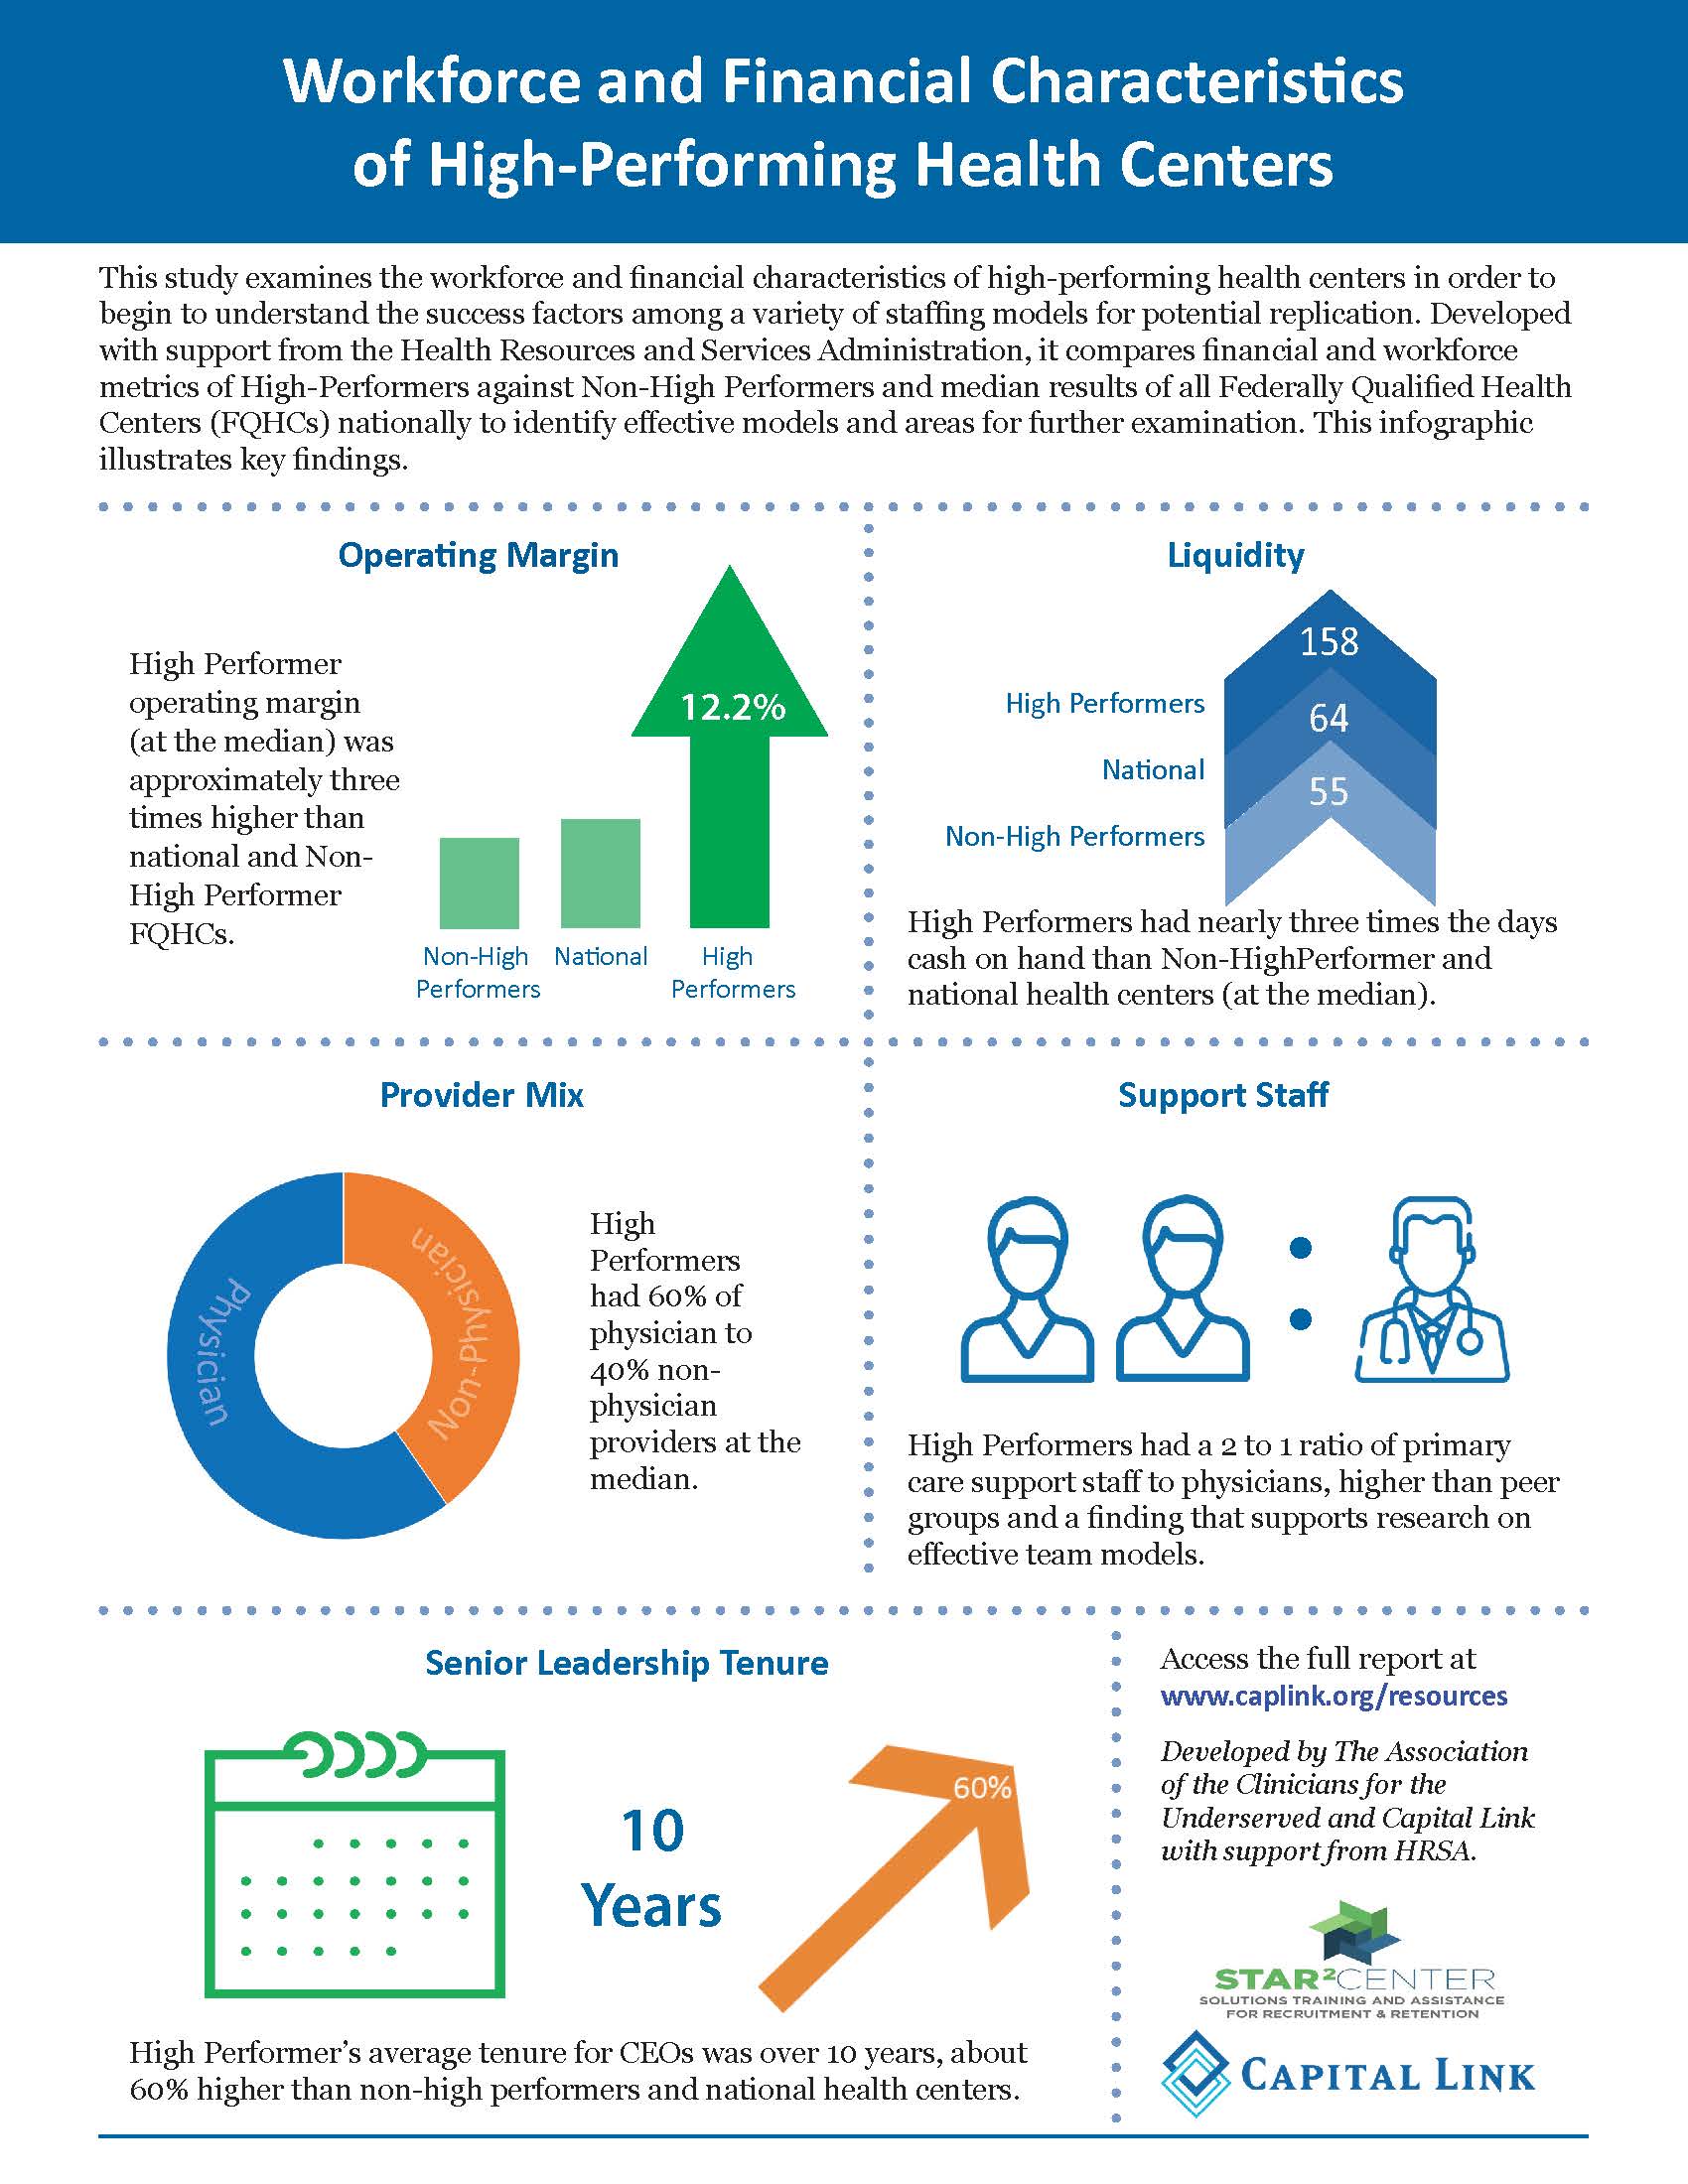 Workforce and Financial Trends Infographic final